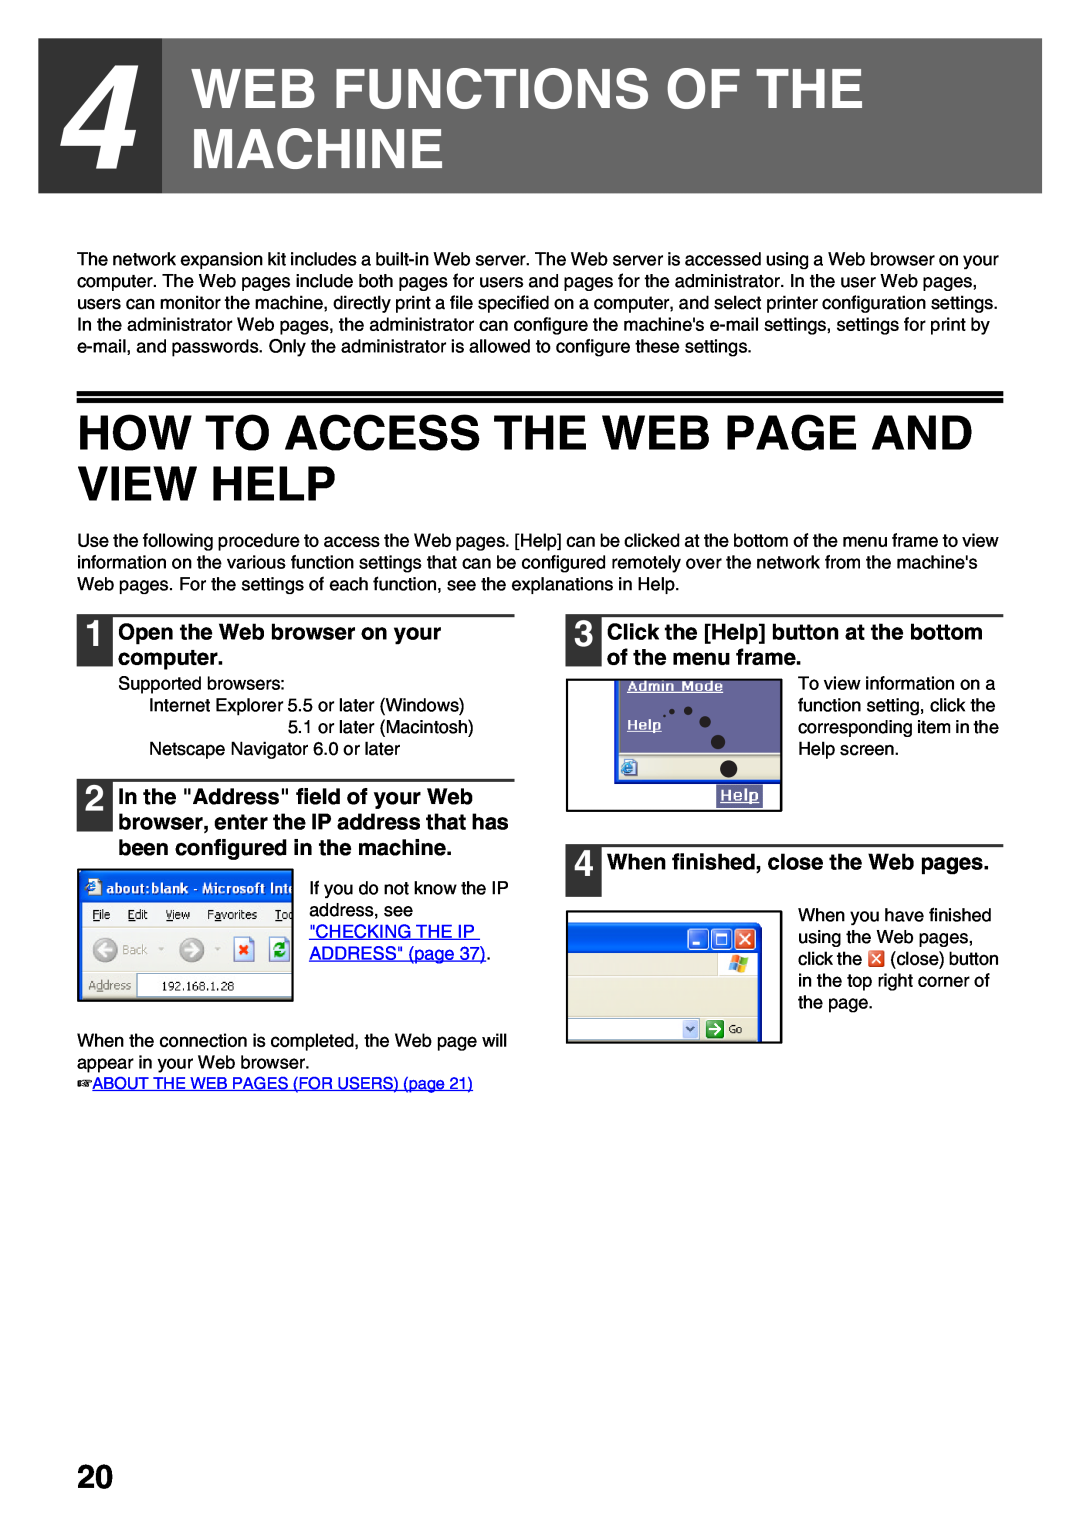 Sharp AR-NB3 Web Functions Of The Machine, How To Access The Web Page And View Help, Open the Web browser on your computer 